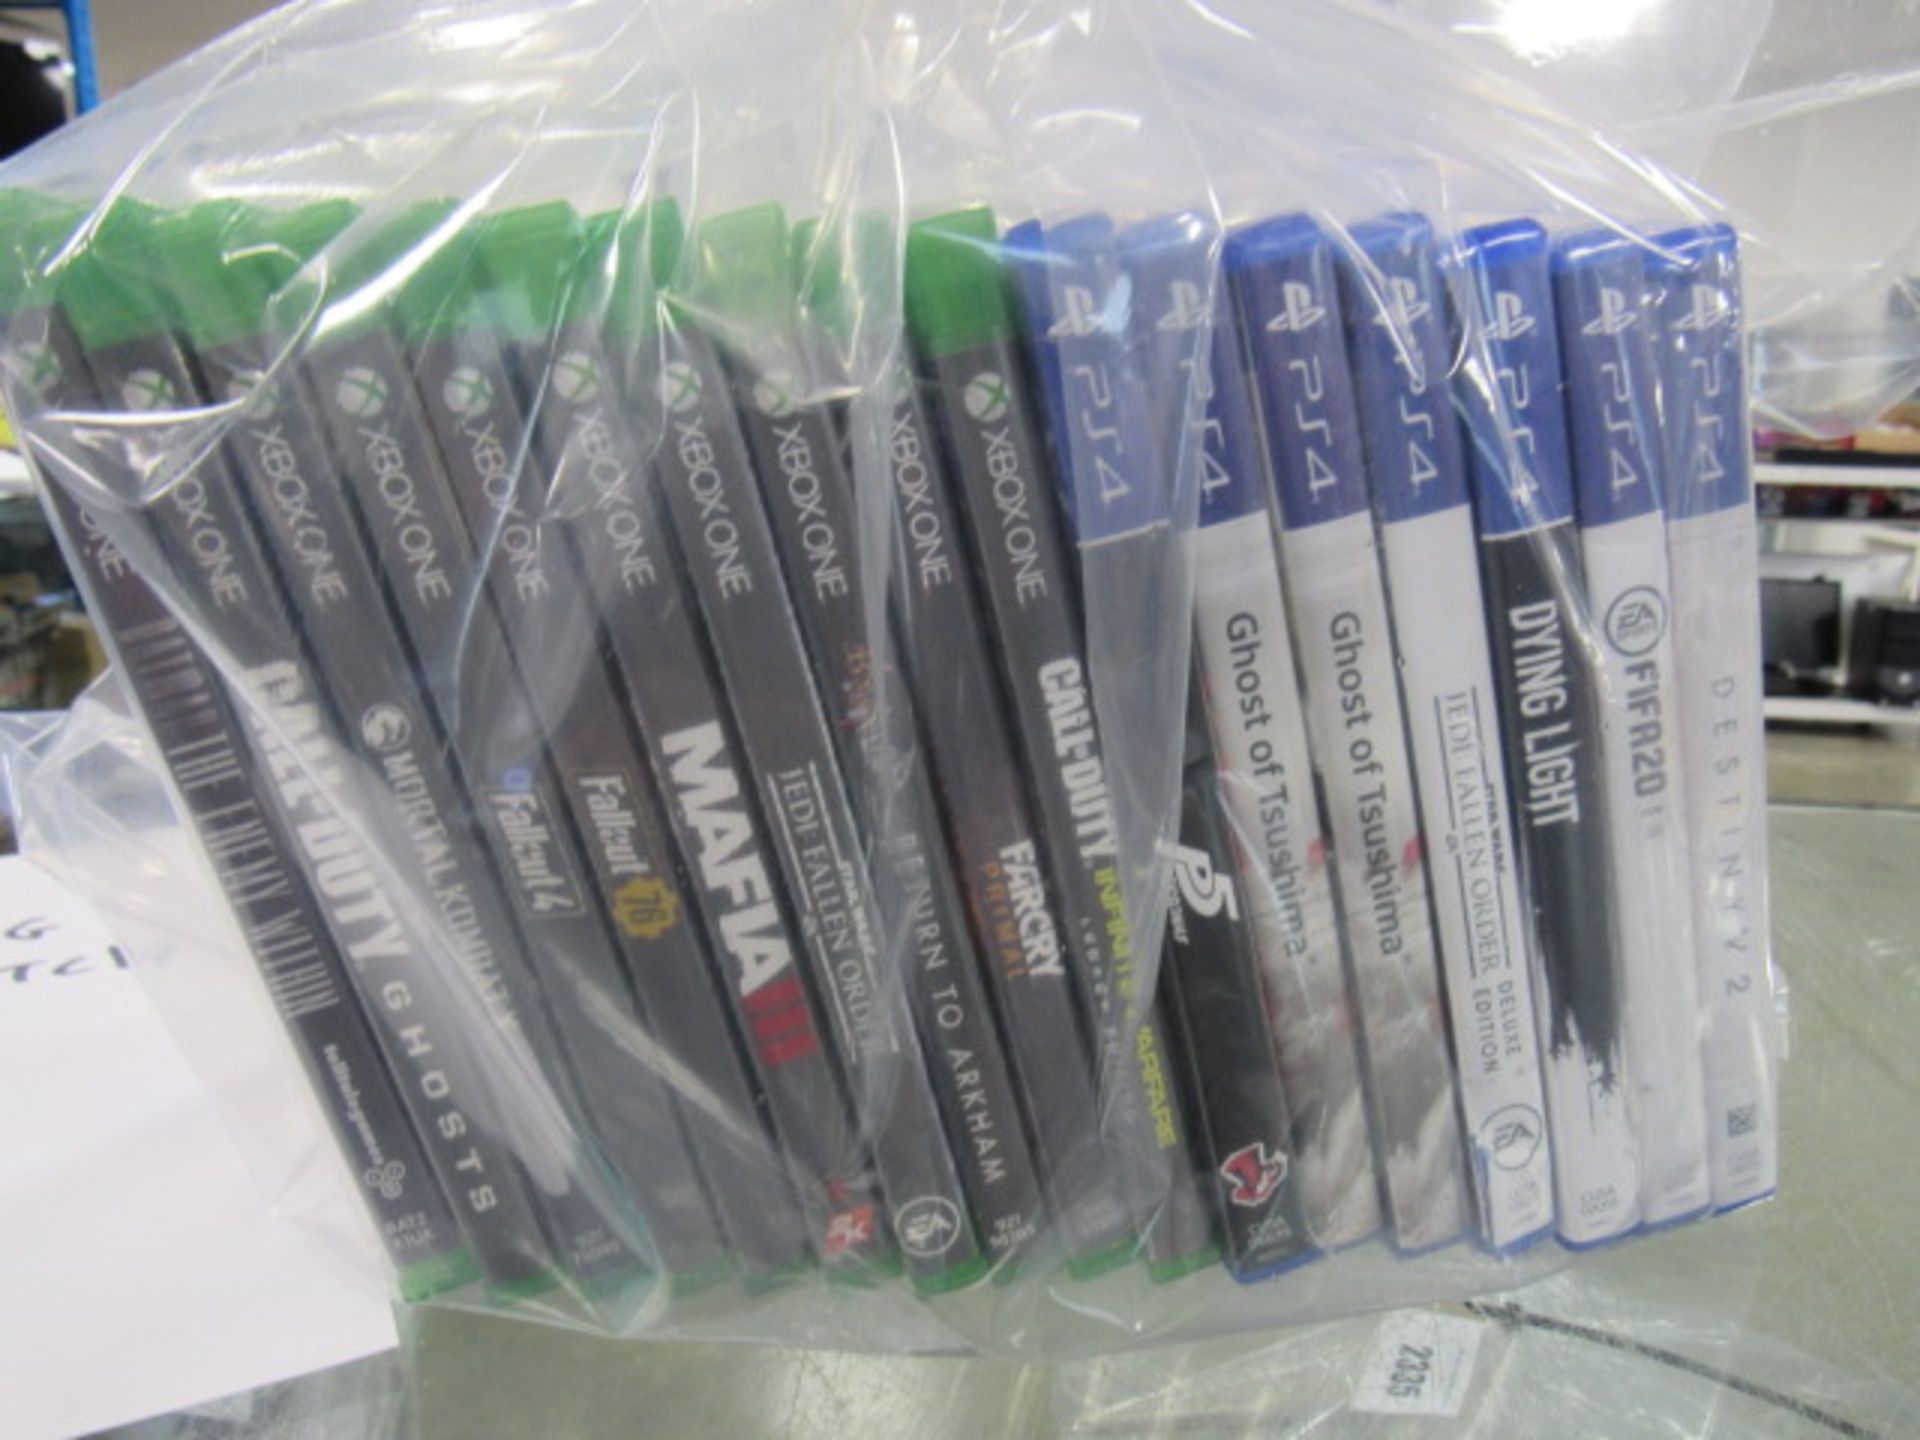 7x PS4 games and 10x Xbox One games